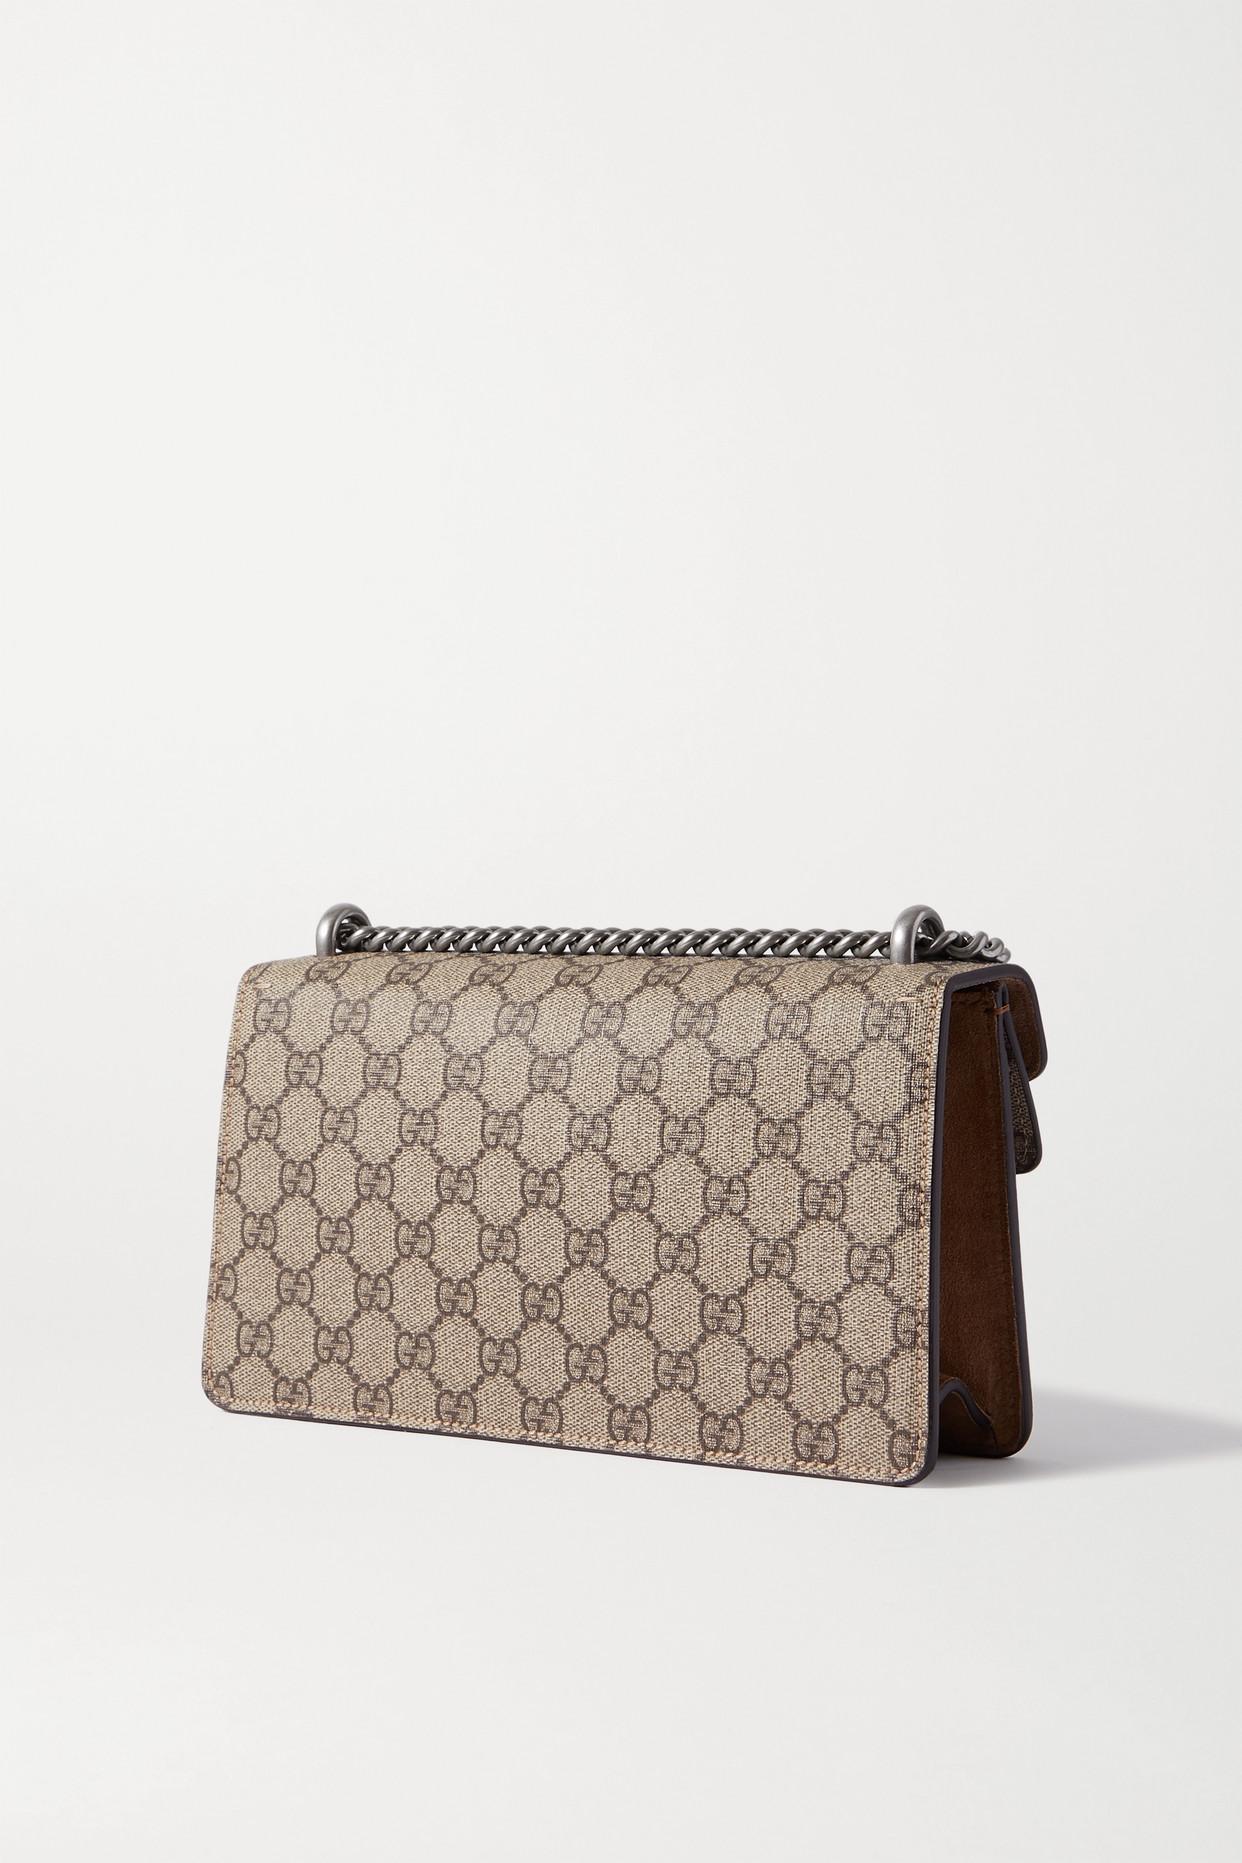 Gucci Dionysus Small Embellished Printed Coated-canvas And Suede Shoulder  Bag in Brown | Lyst